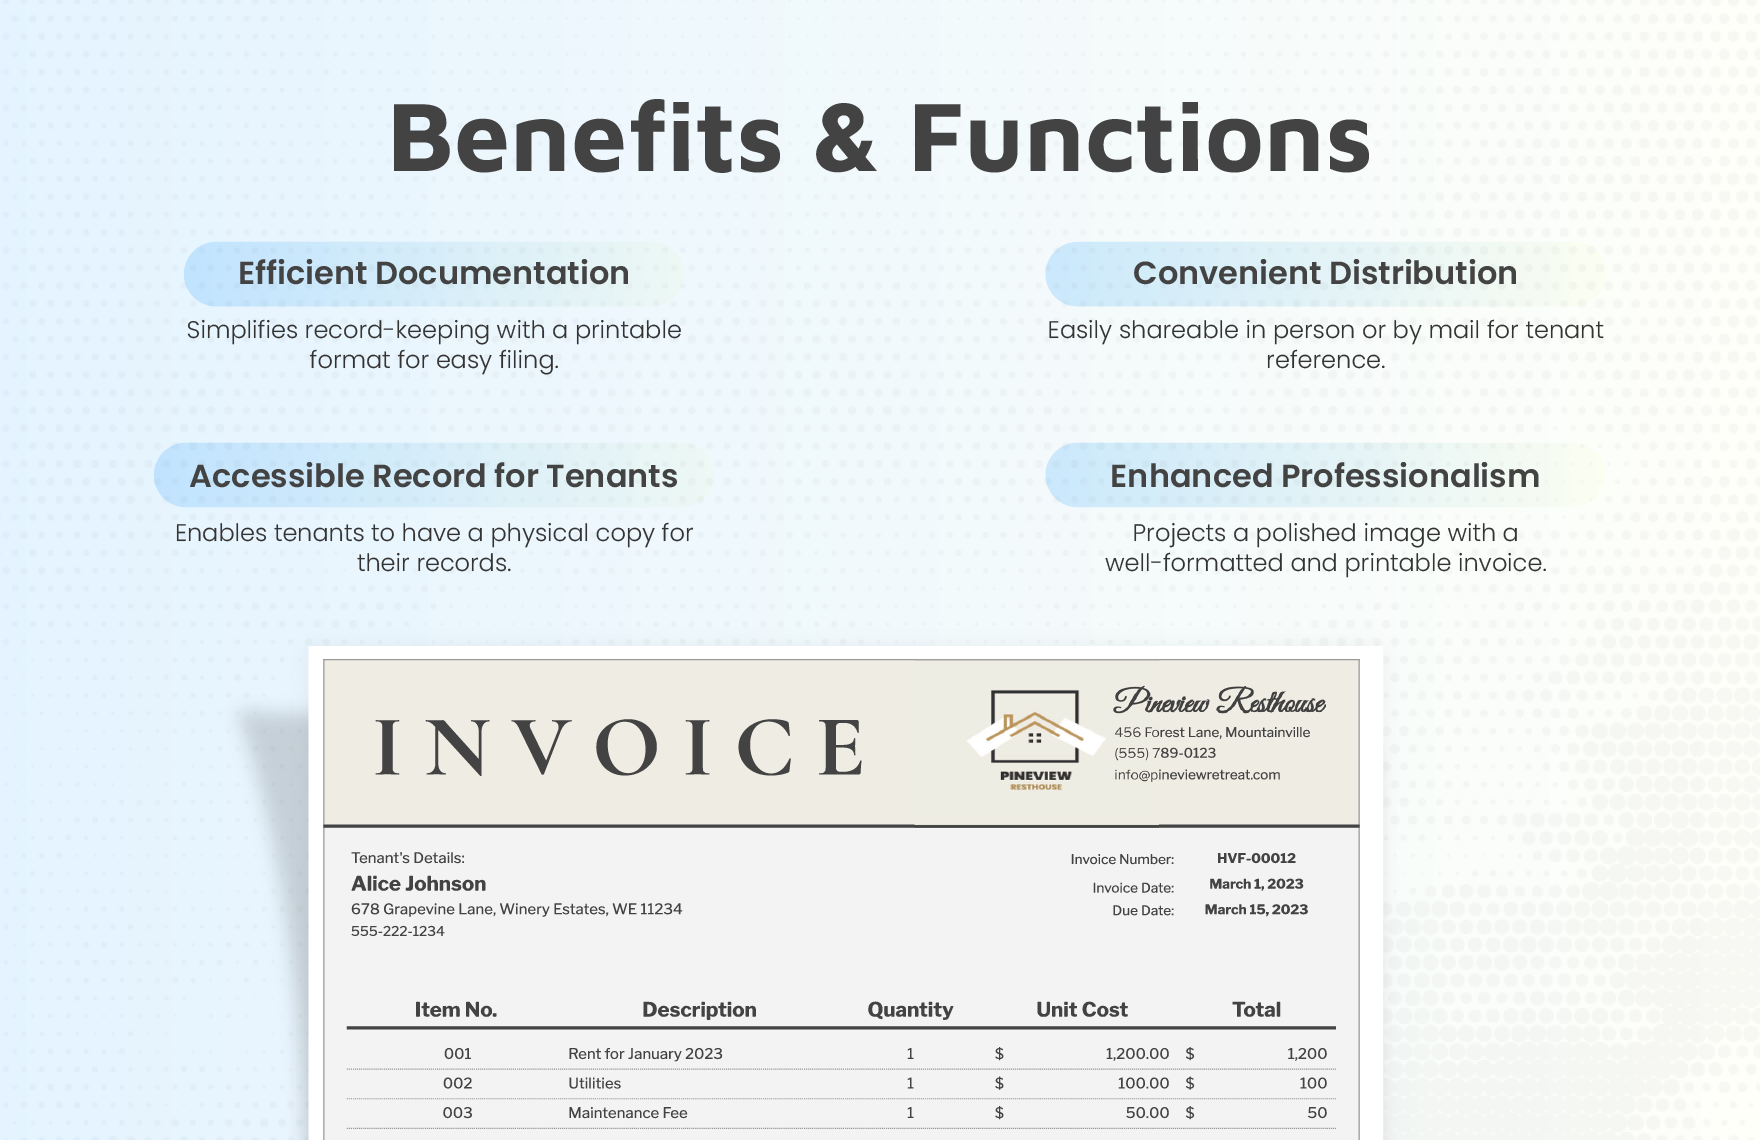 Printable Rent Invoice Template